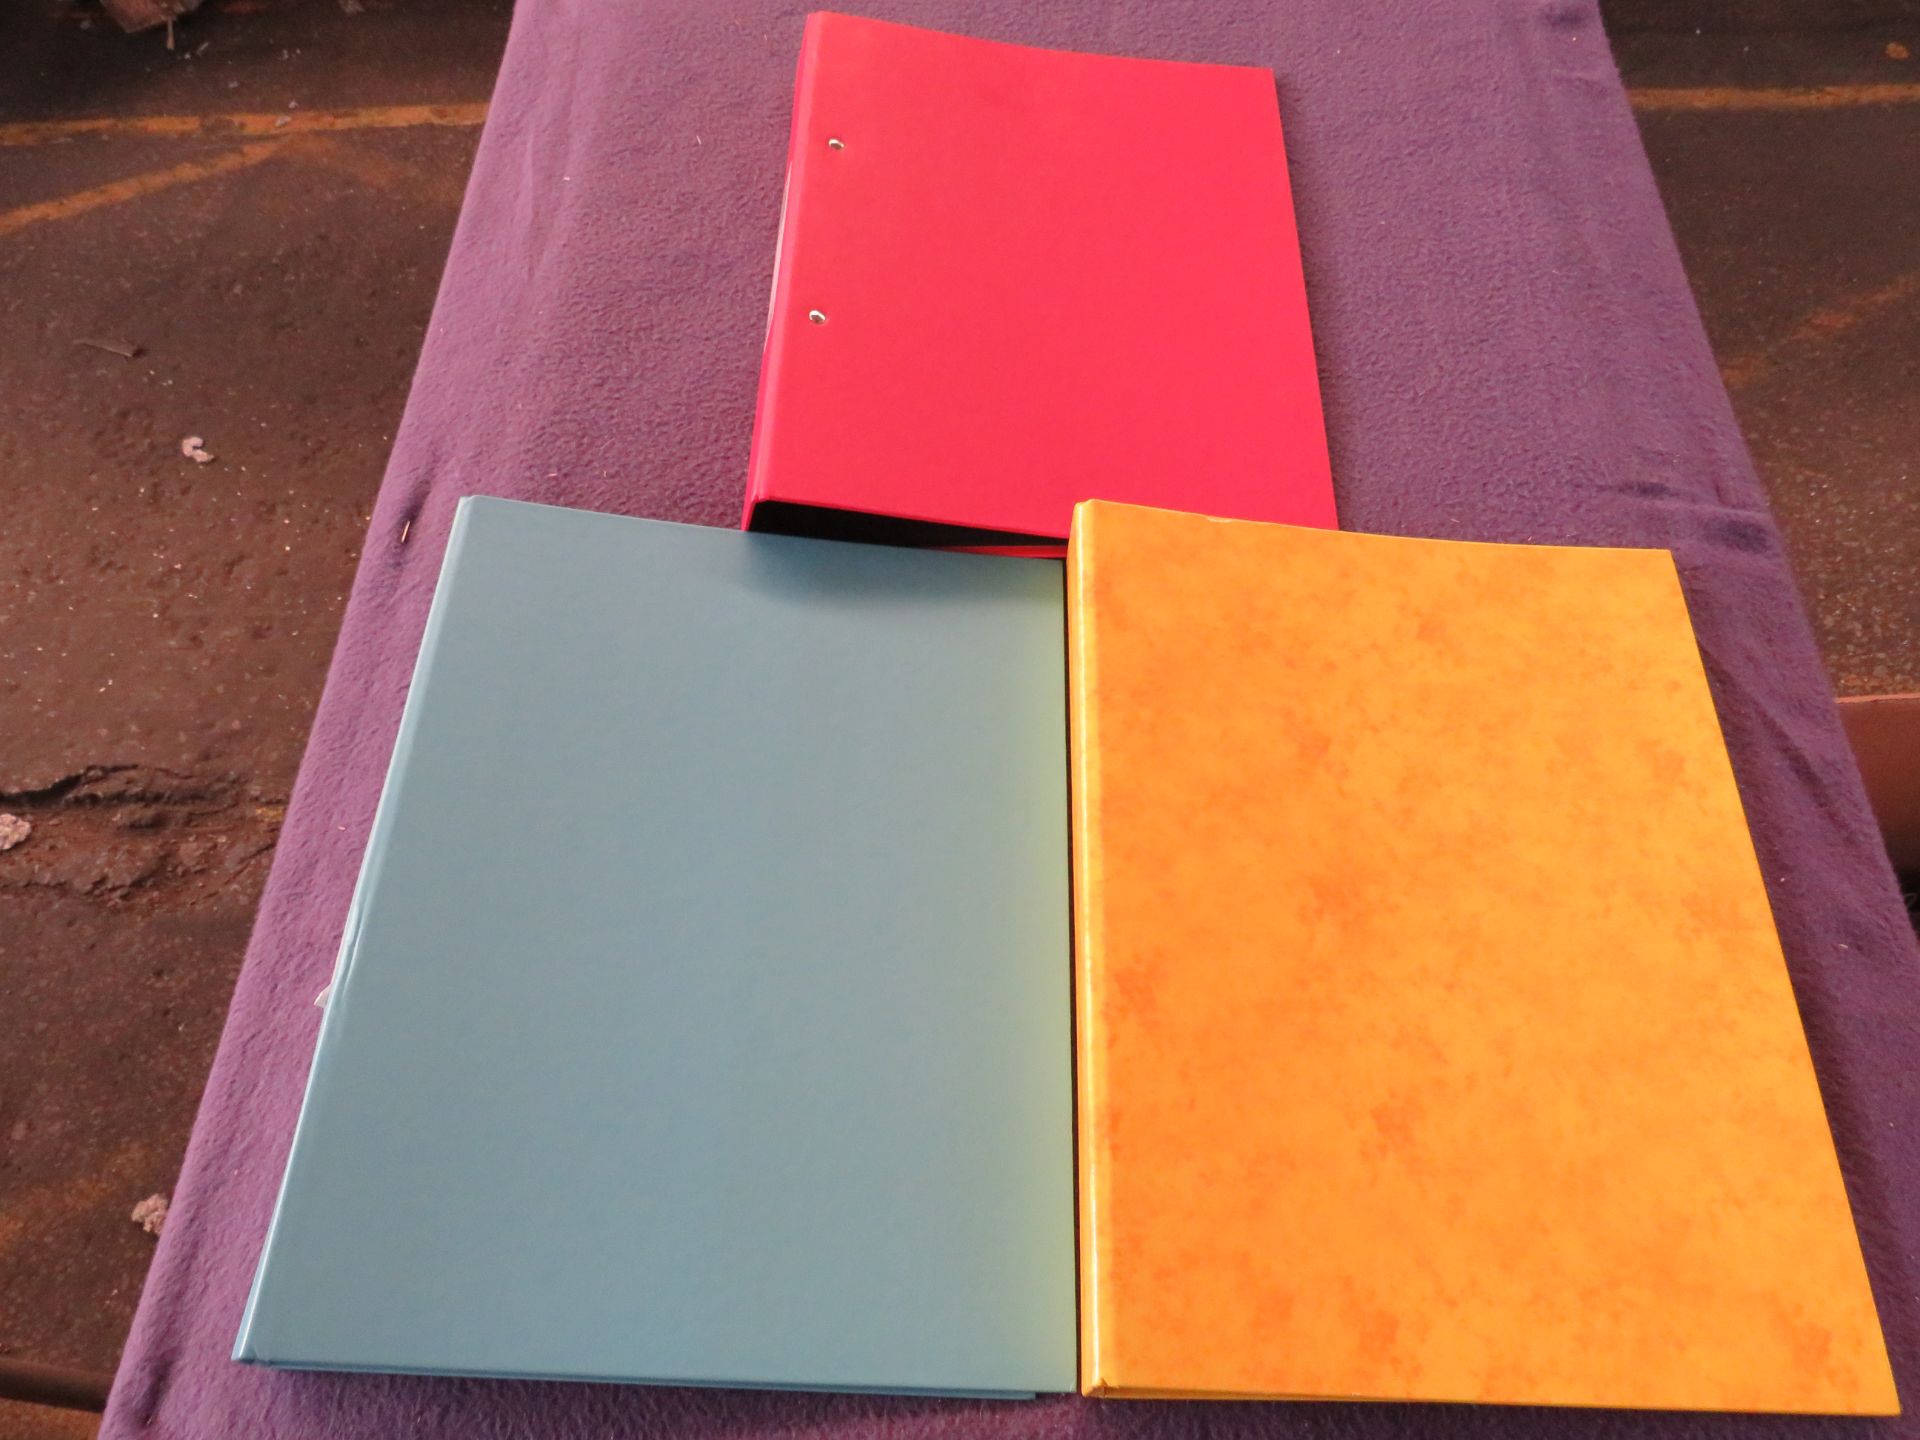 6x Binder Files A4 - Assorted Colours, Picked at Random - Unused.